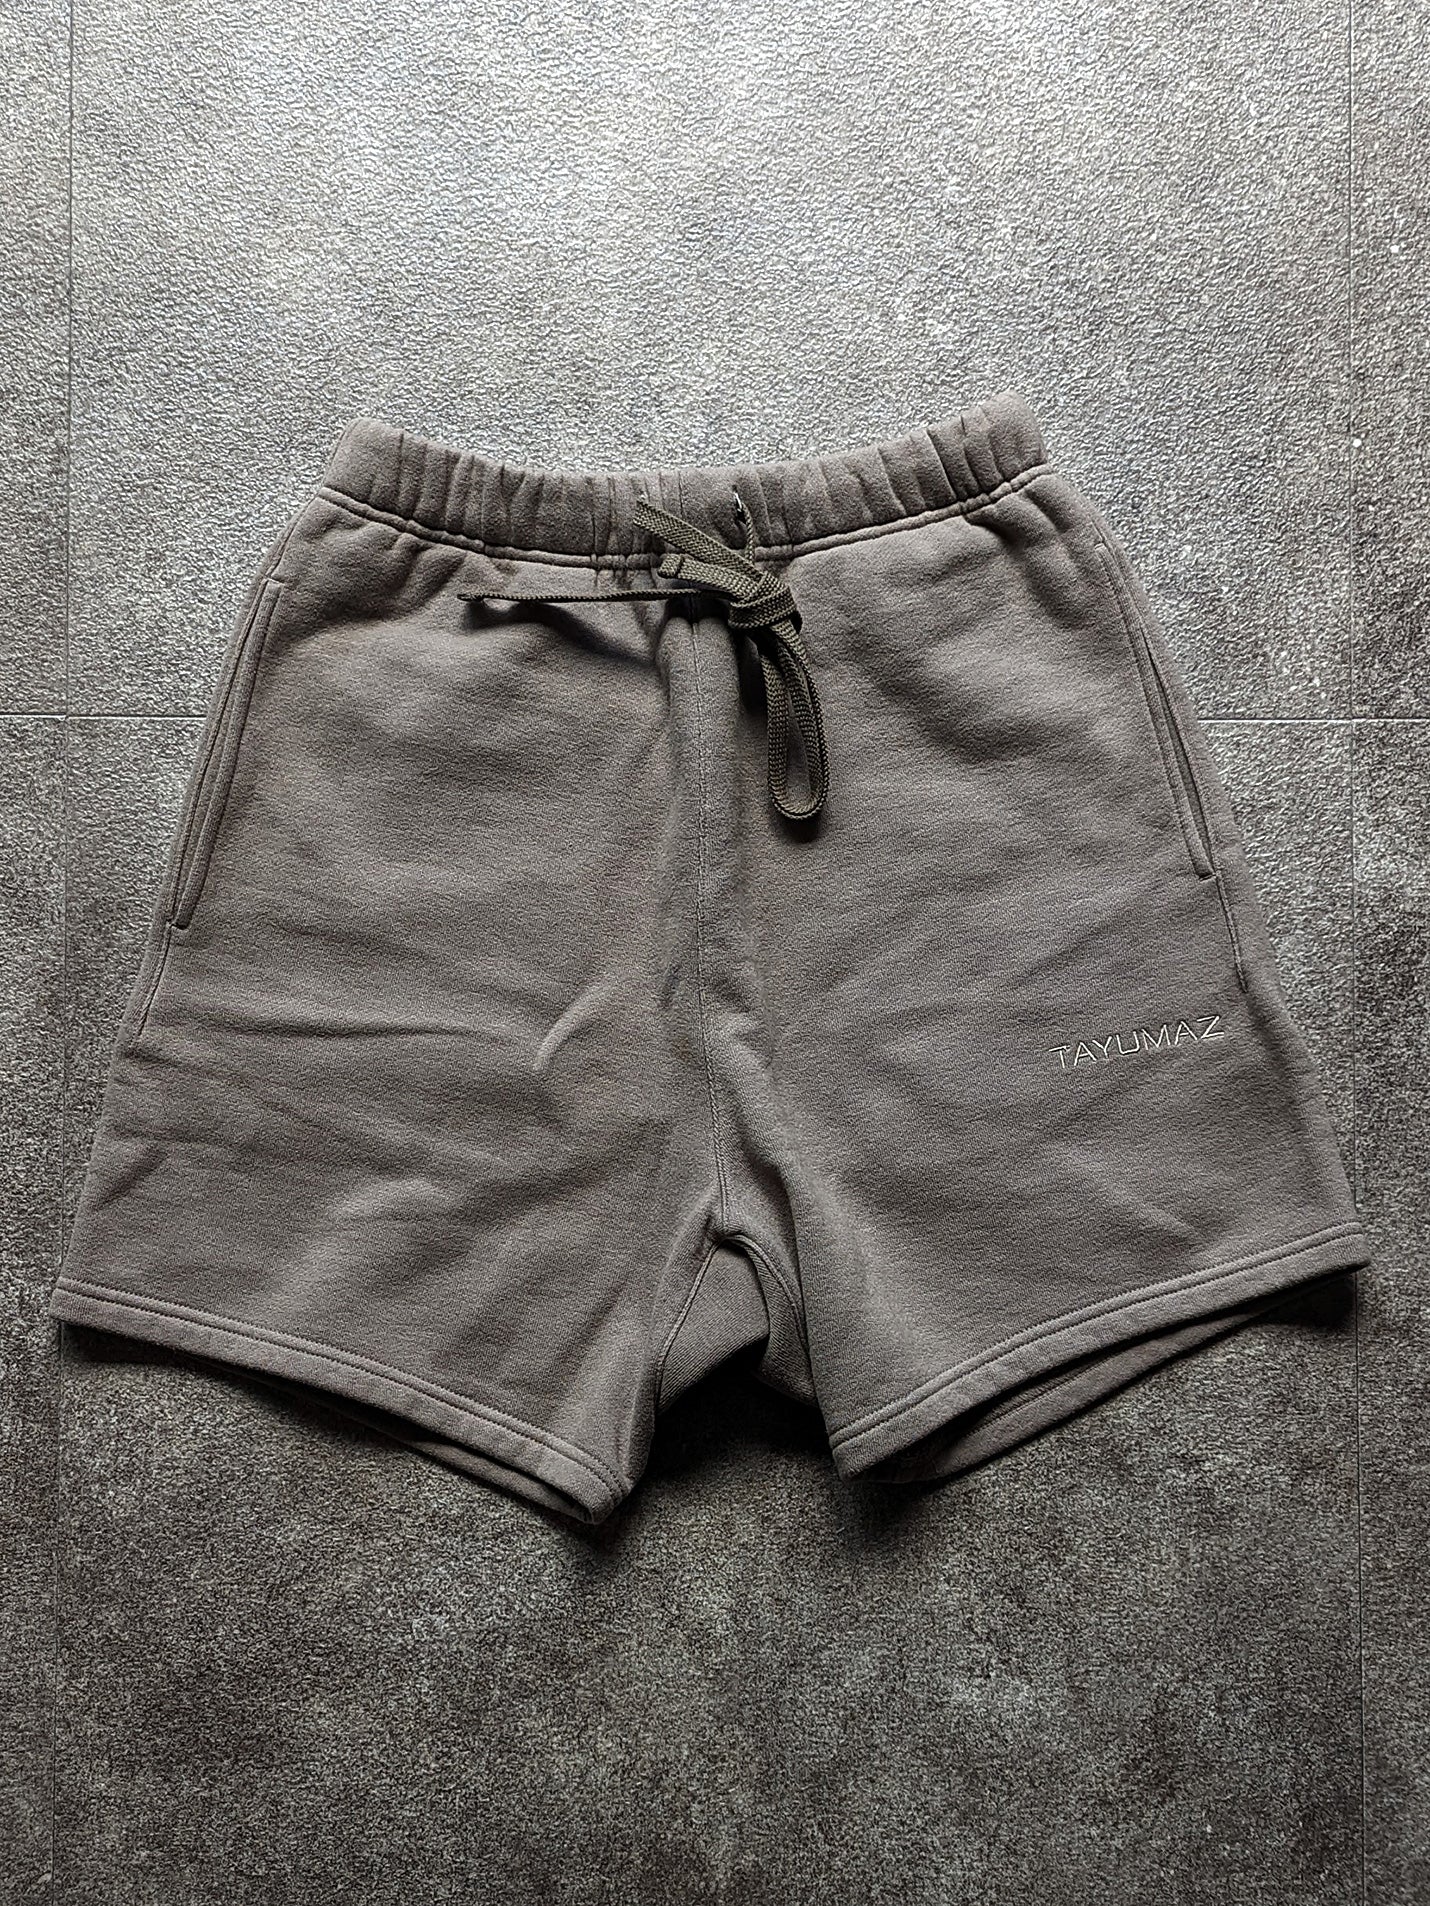 Washed cotton sweat shorts in gray